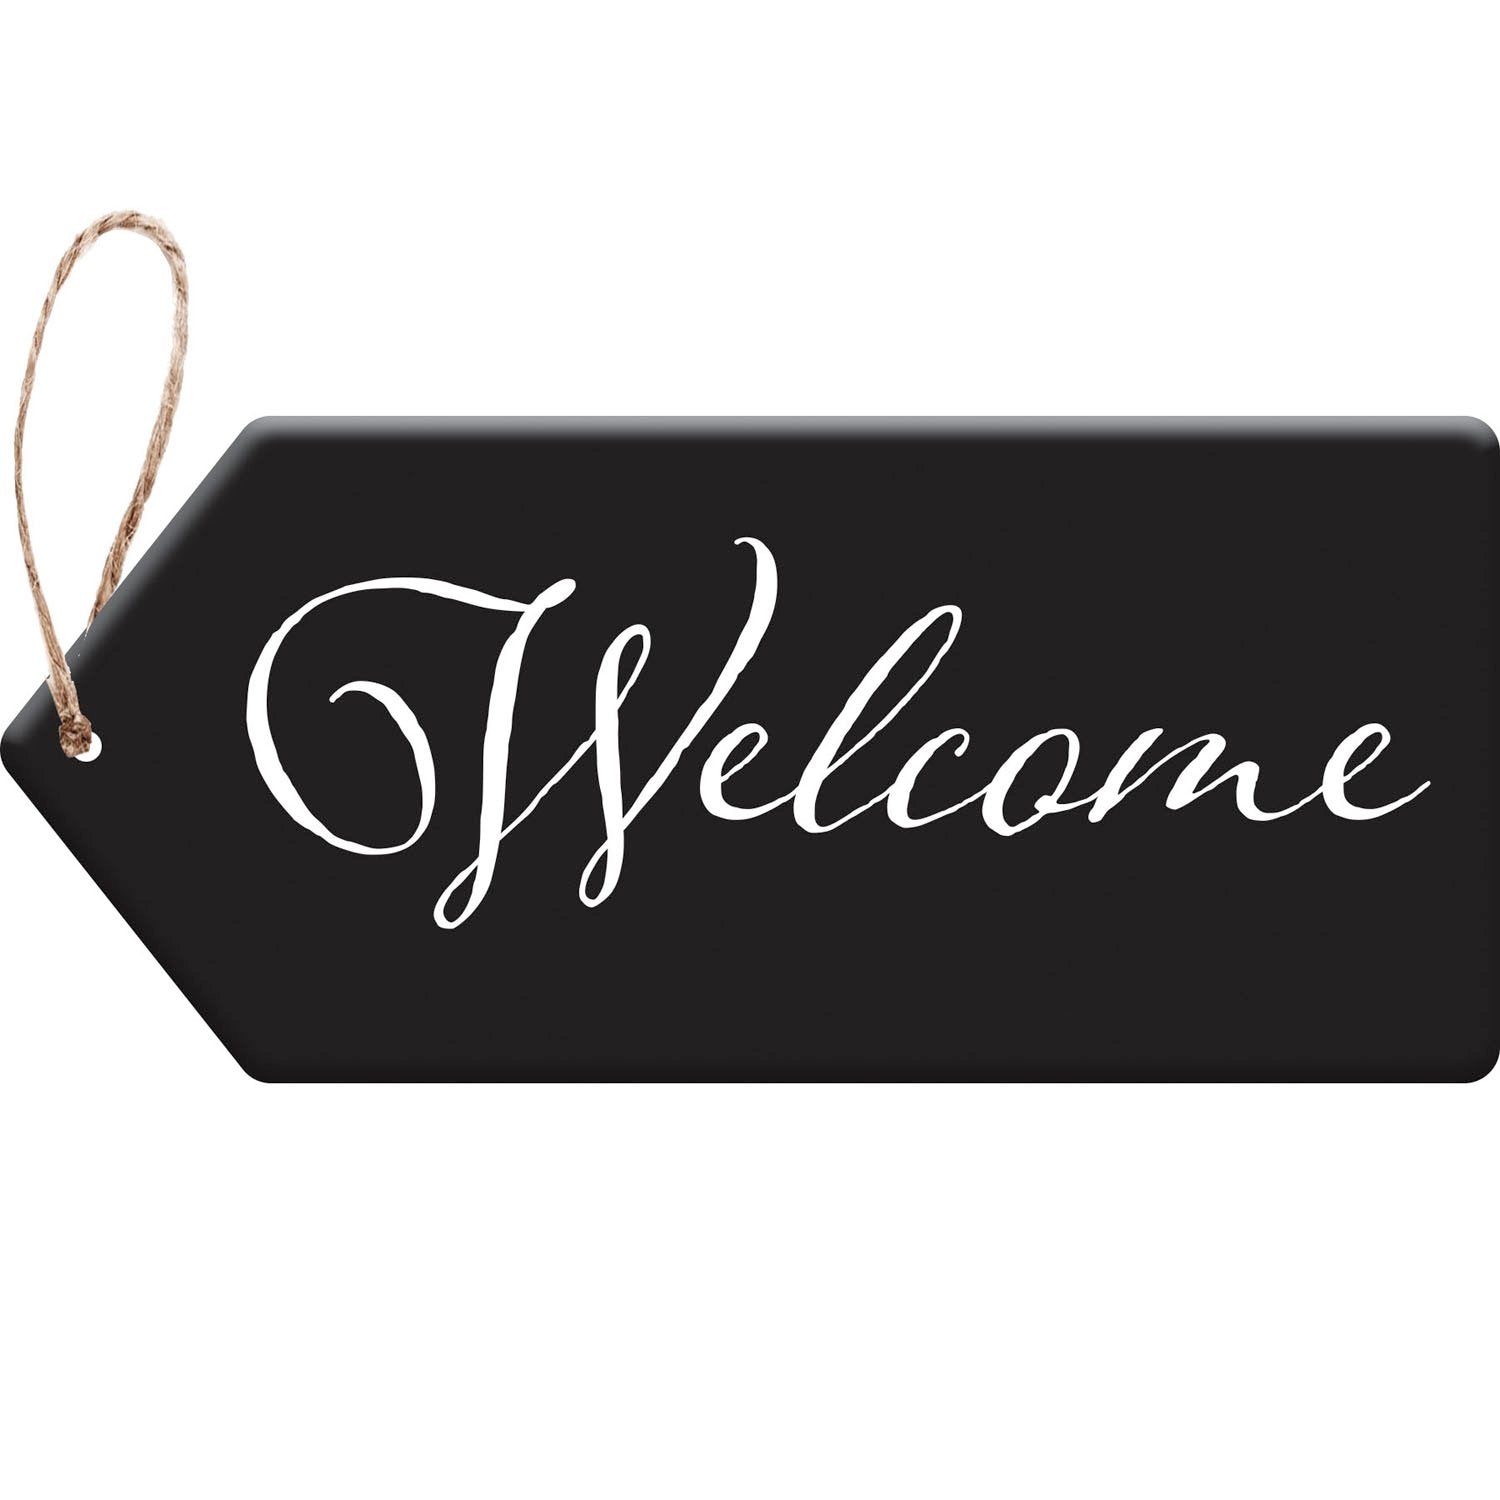 Evergreen Flag Beautiful Springtime Classic Welcome Text Door Tag Hanging  Door Decor - 18 x 8 Inches Fade and Weather Resistant Outdoor Decoration  For